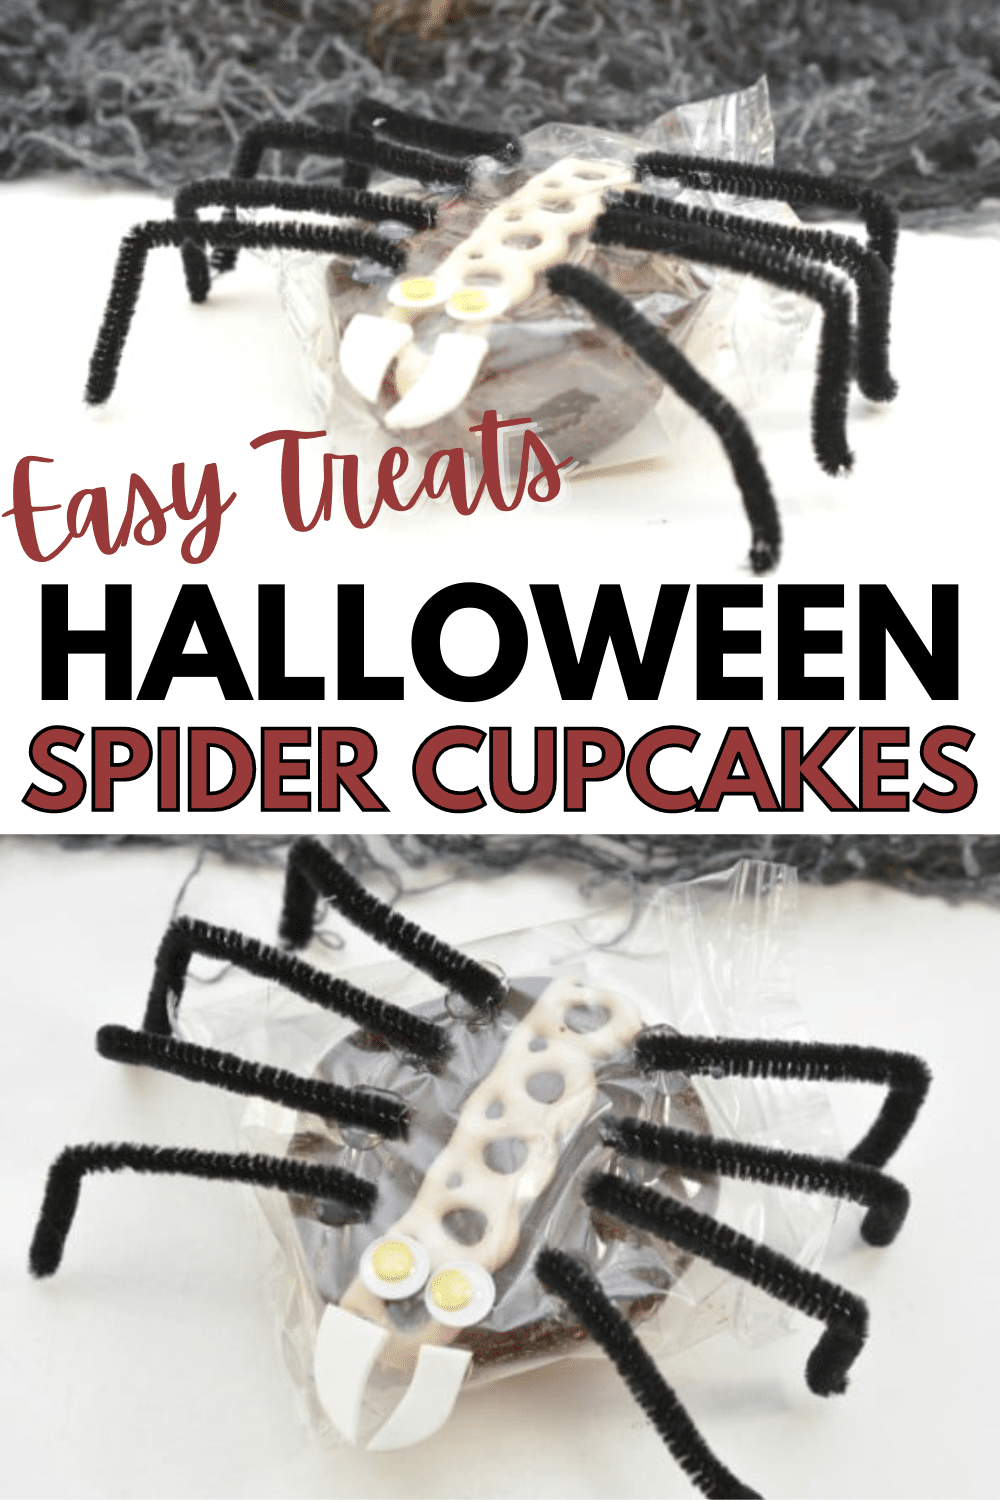 These Cupcake Spiders are super easy to make since you start with a Hostess cupcake! Such a simple way to add some fun to make a Halloween lunchbox treat! #Halloween #funfood #easycraft via @wondermomwannab